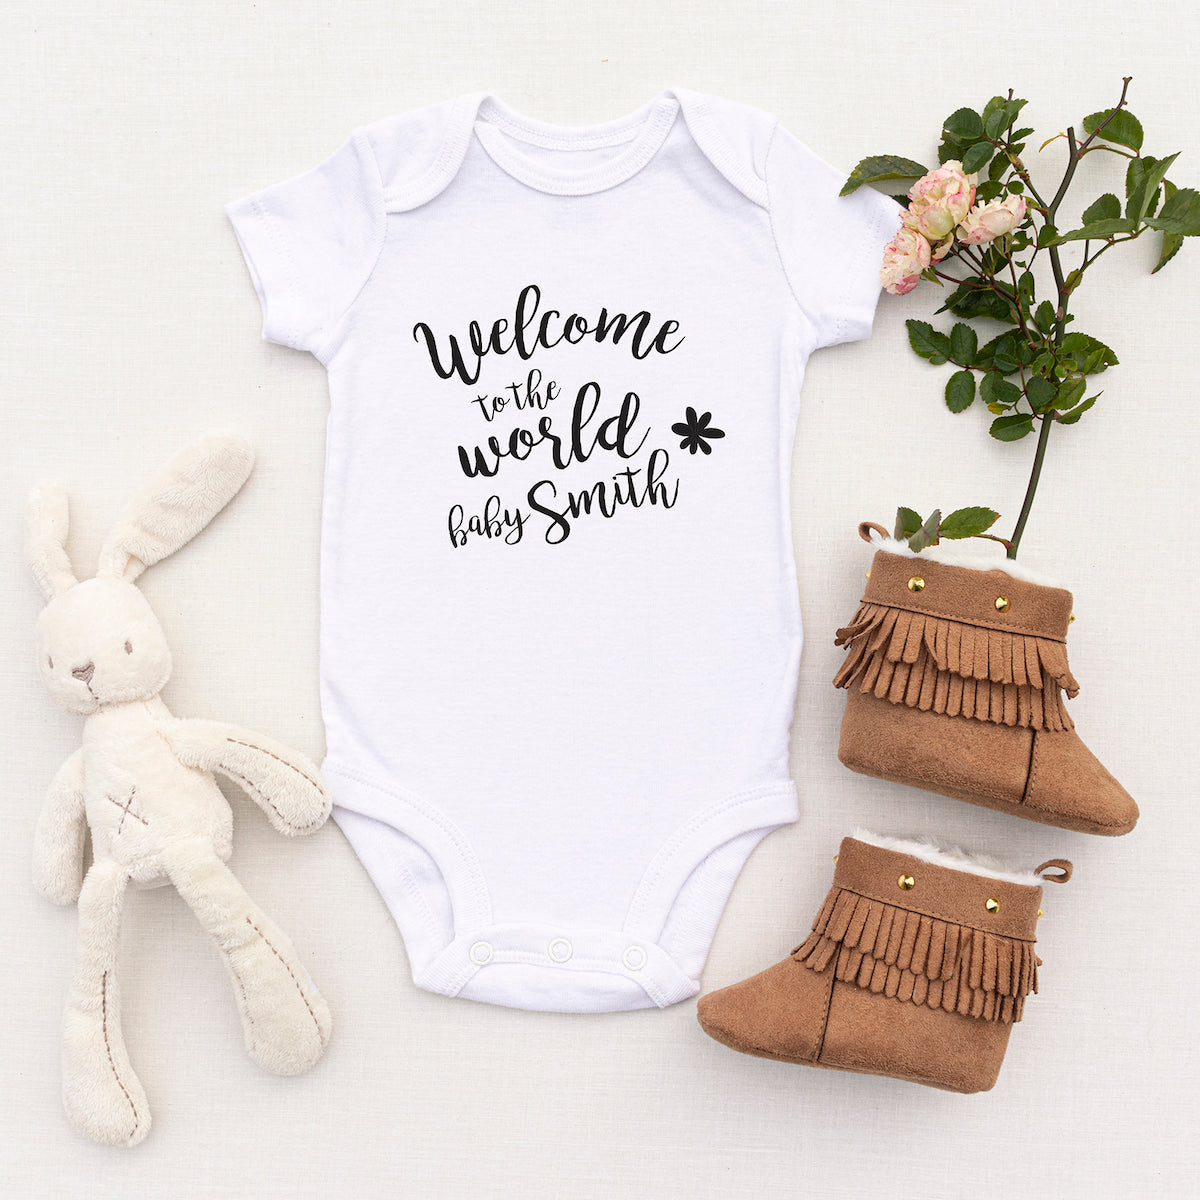 Personalised White Baby Body Suit Grow Vest - Little Daisy